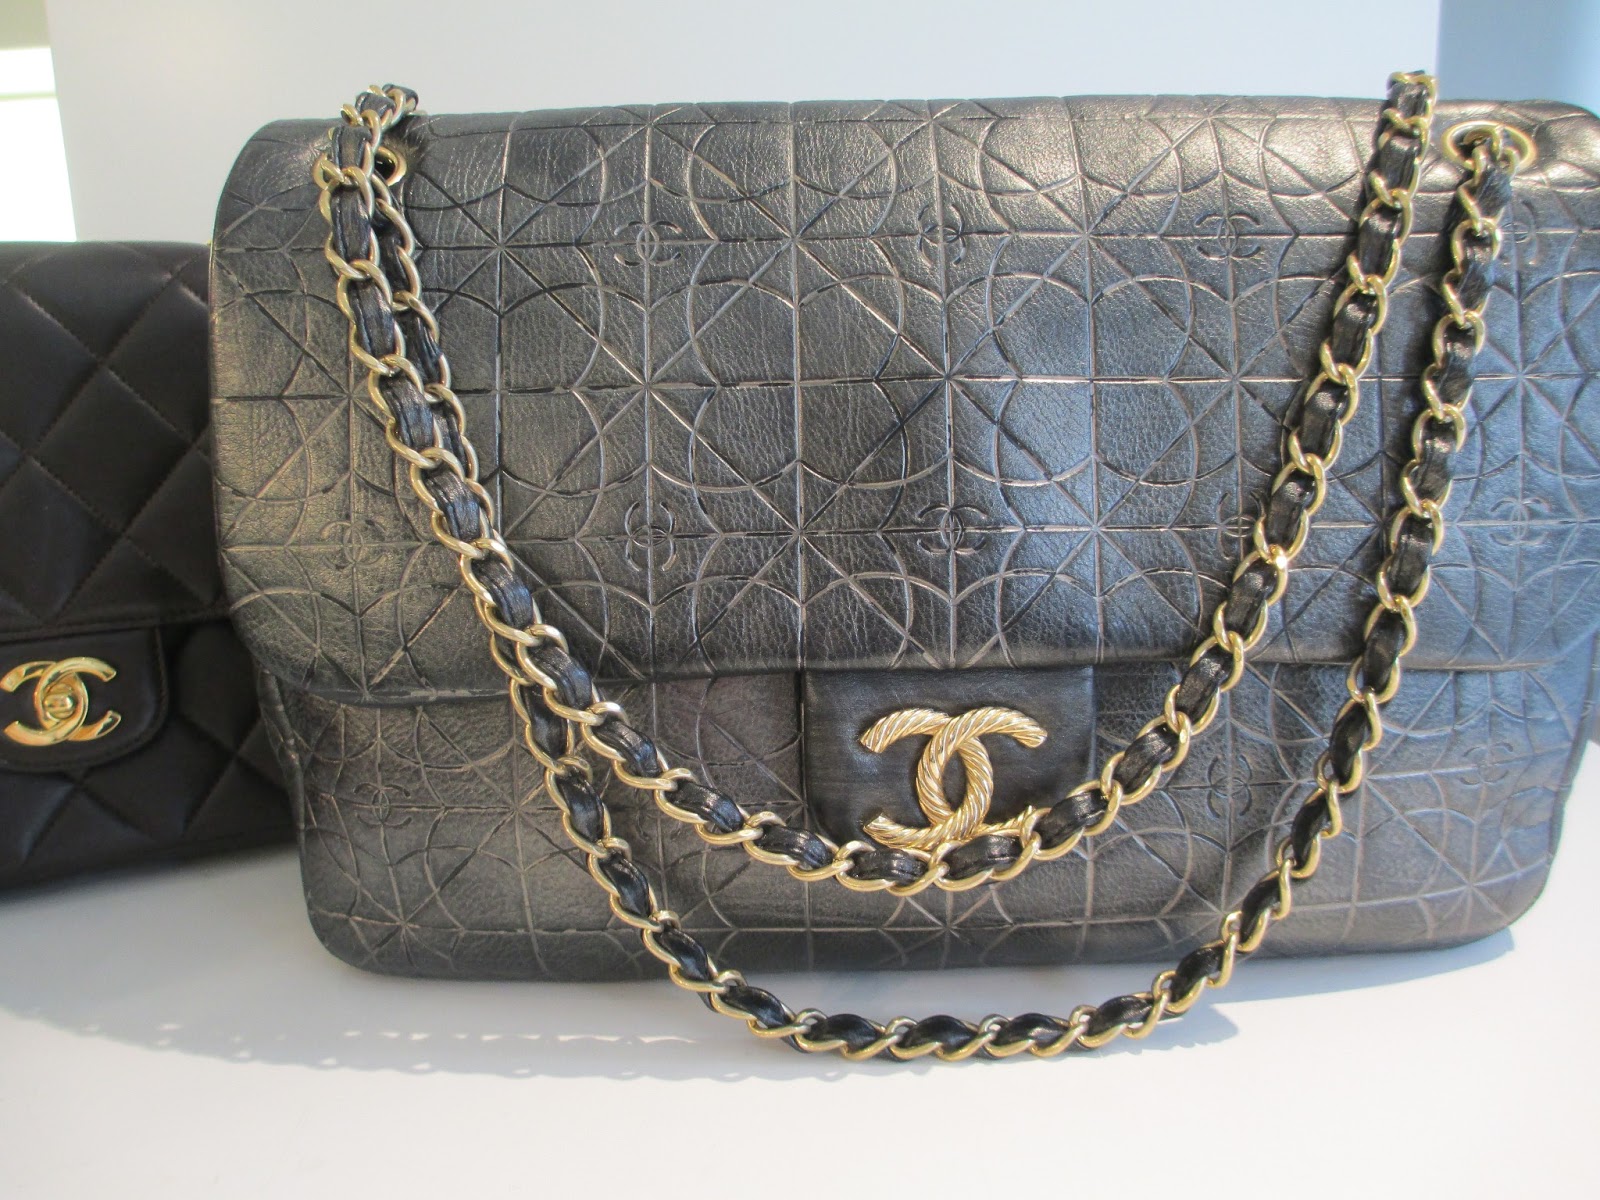 Vancouver Luxury Designer Consignment Shop: Authentic Luxury Pre Owned Chanel Handbags ~ Buy ...